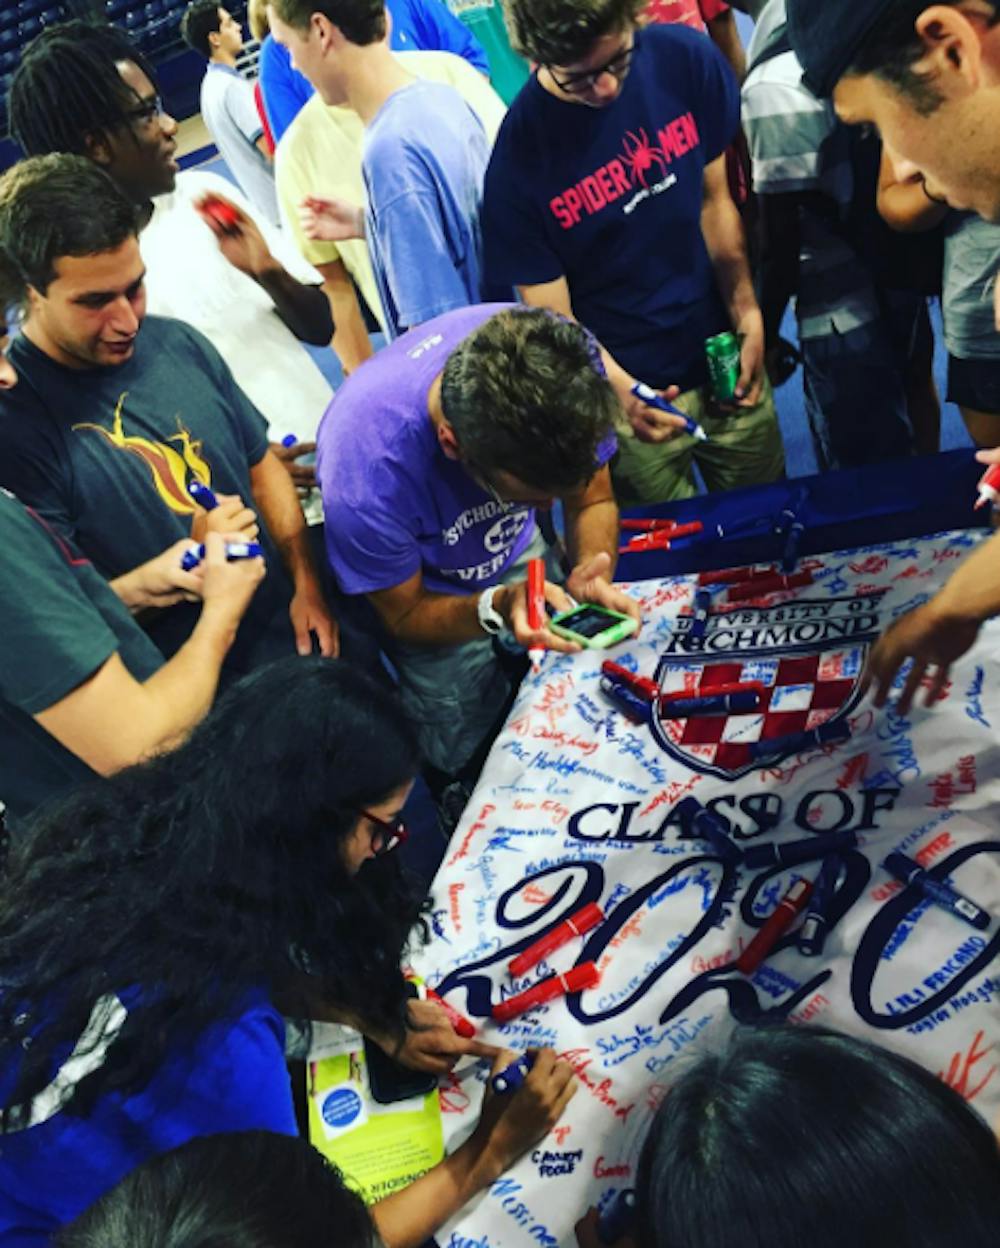 <p>The freshmen class signs their 2020 banner during orientation.</p><p>Photo courtesy of Instagram/University of Richmond</p>